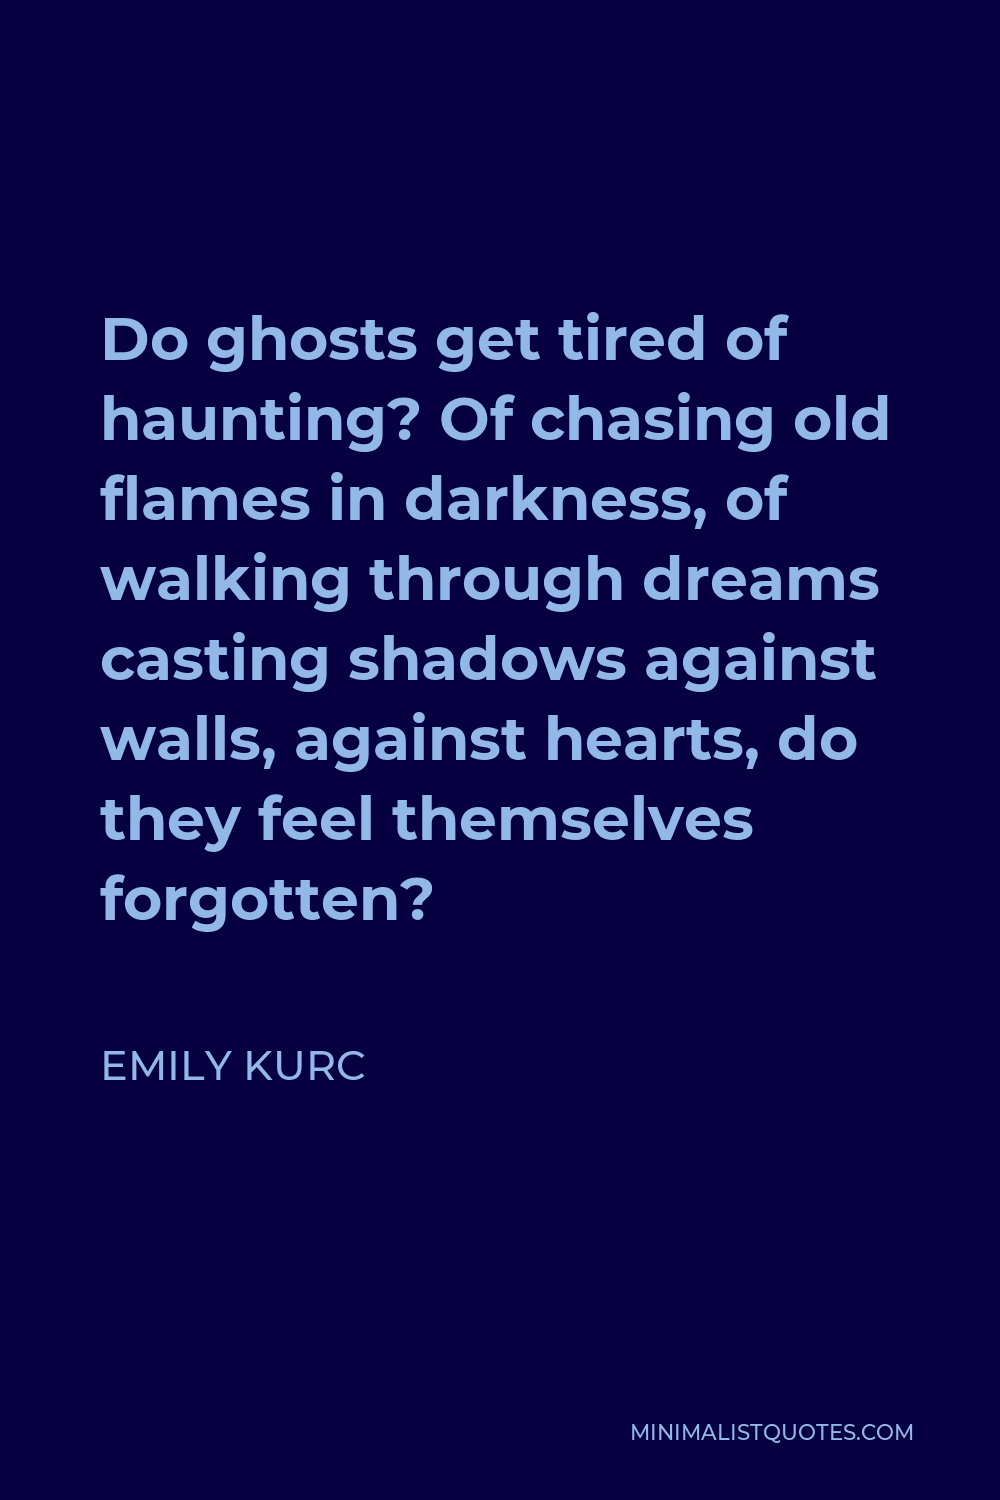 Emily Kurc Quote - Do ghosts get tired of haunting? Of chasing old flames in darkness, of walking through dreams casting shadows against walls, against hearts, do they feel themselves forgotten?